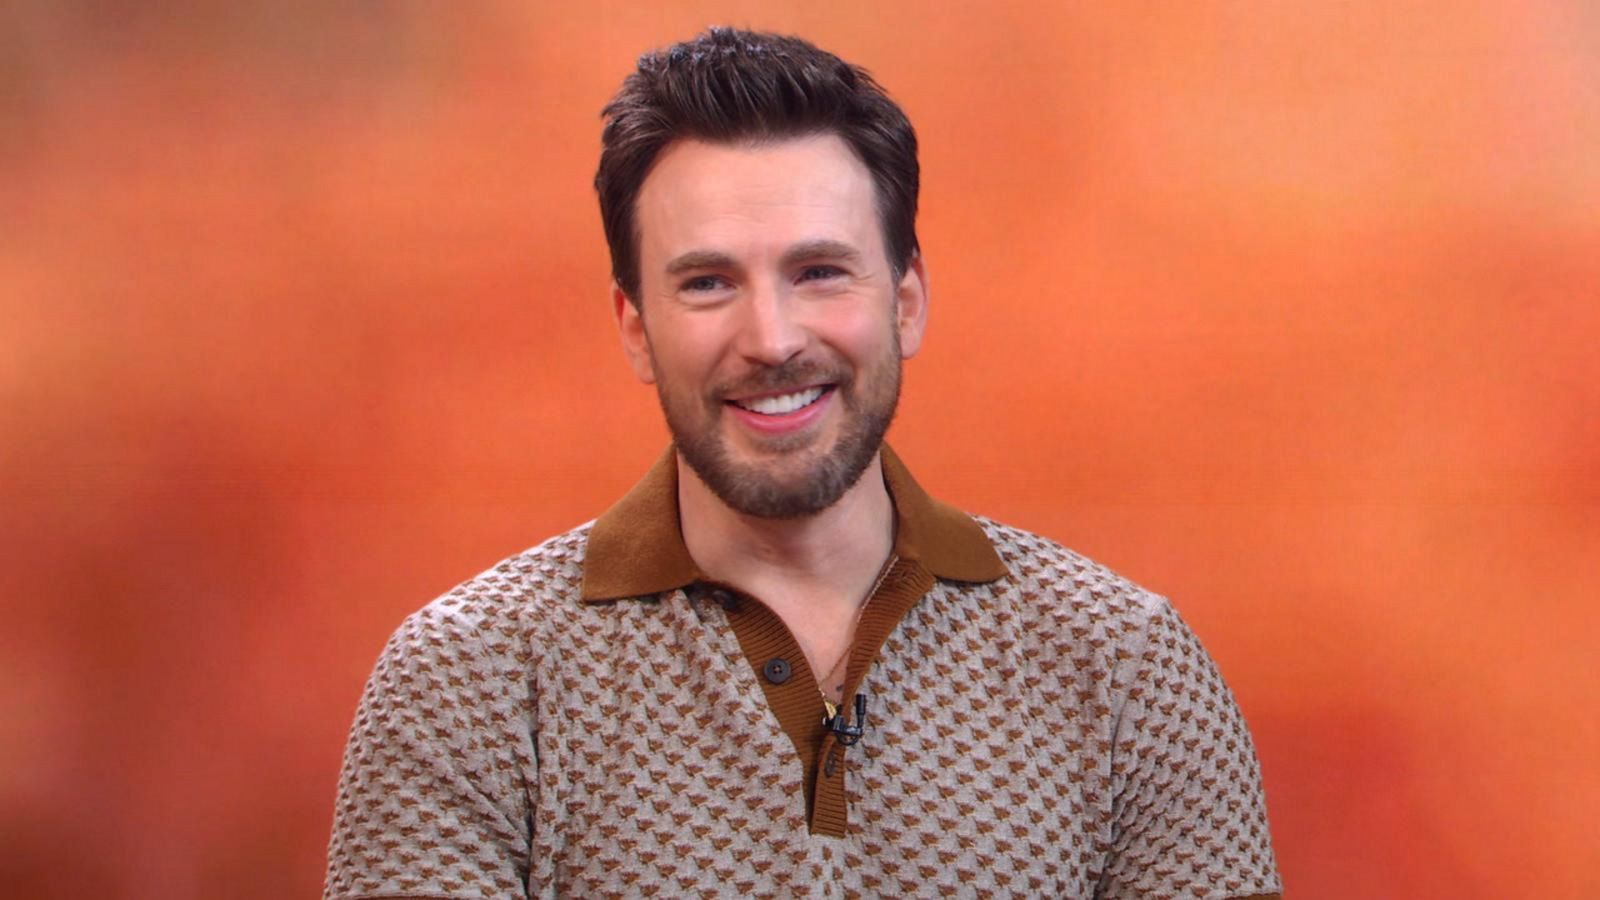 HD wallpaper: Chris evans, Actor, Guy, Charming, Smile, one person, smiling  | Wallpaper Flare